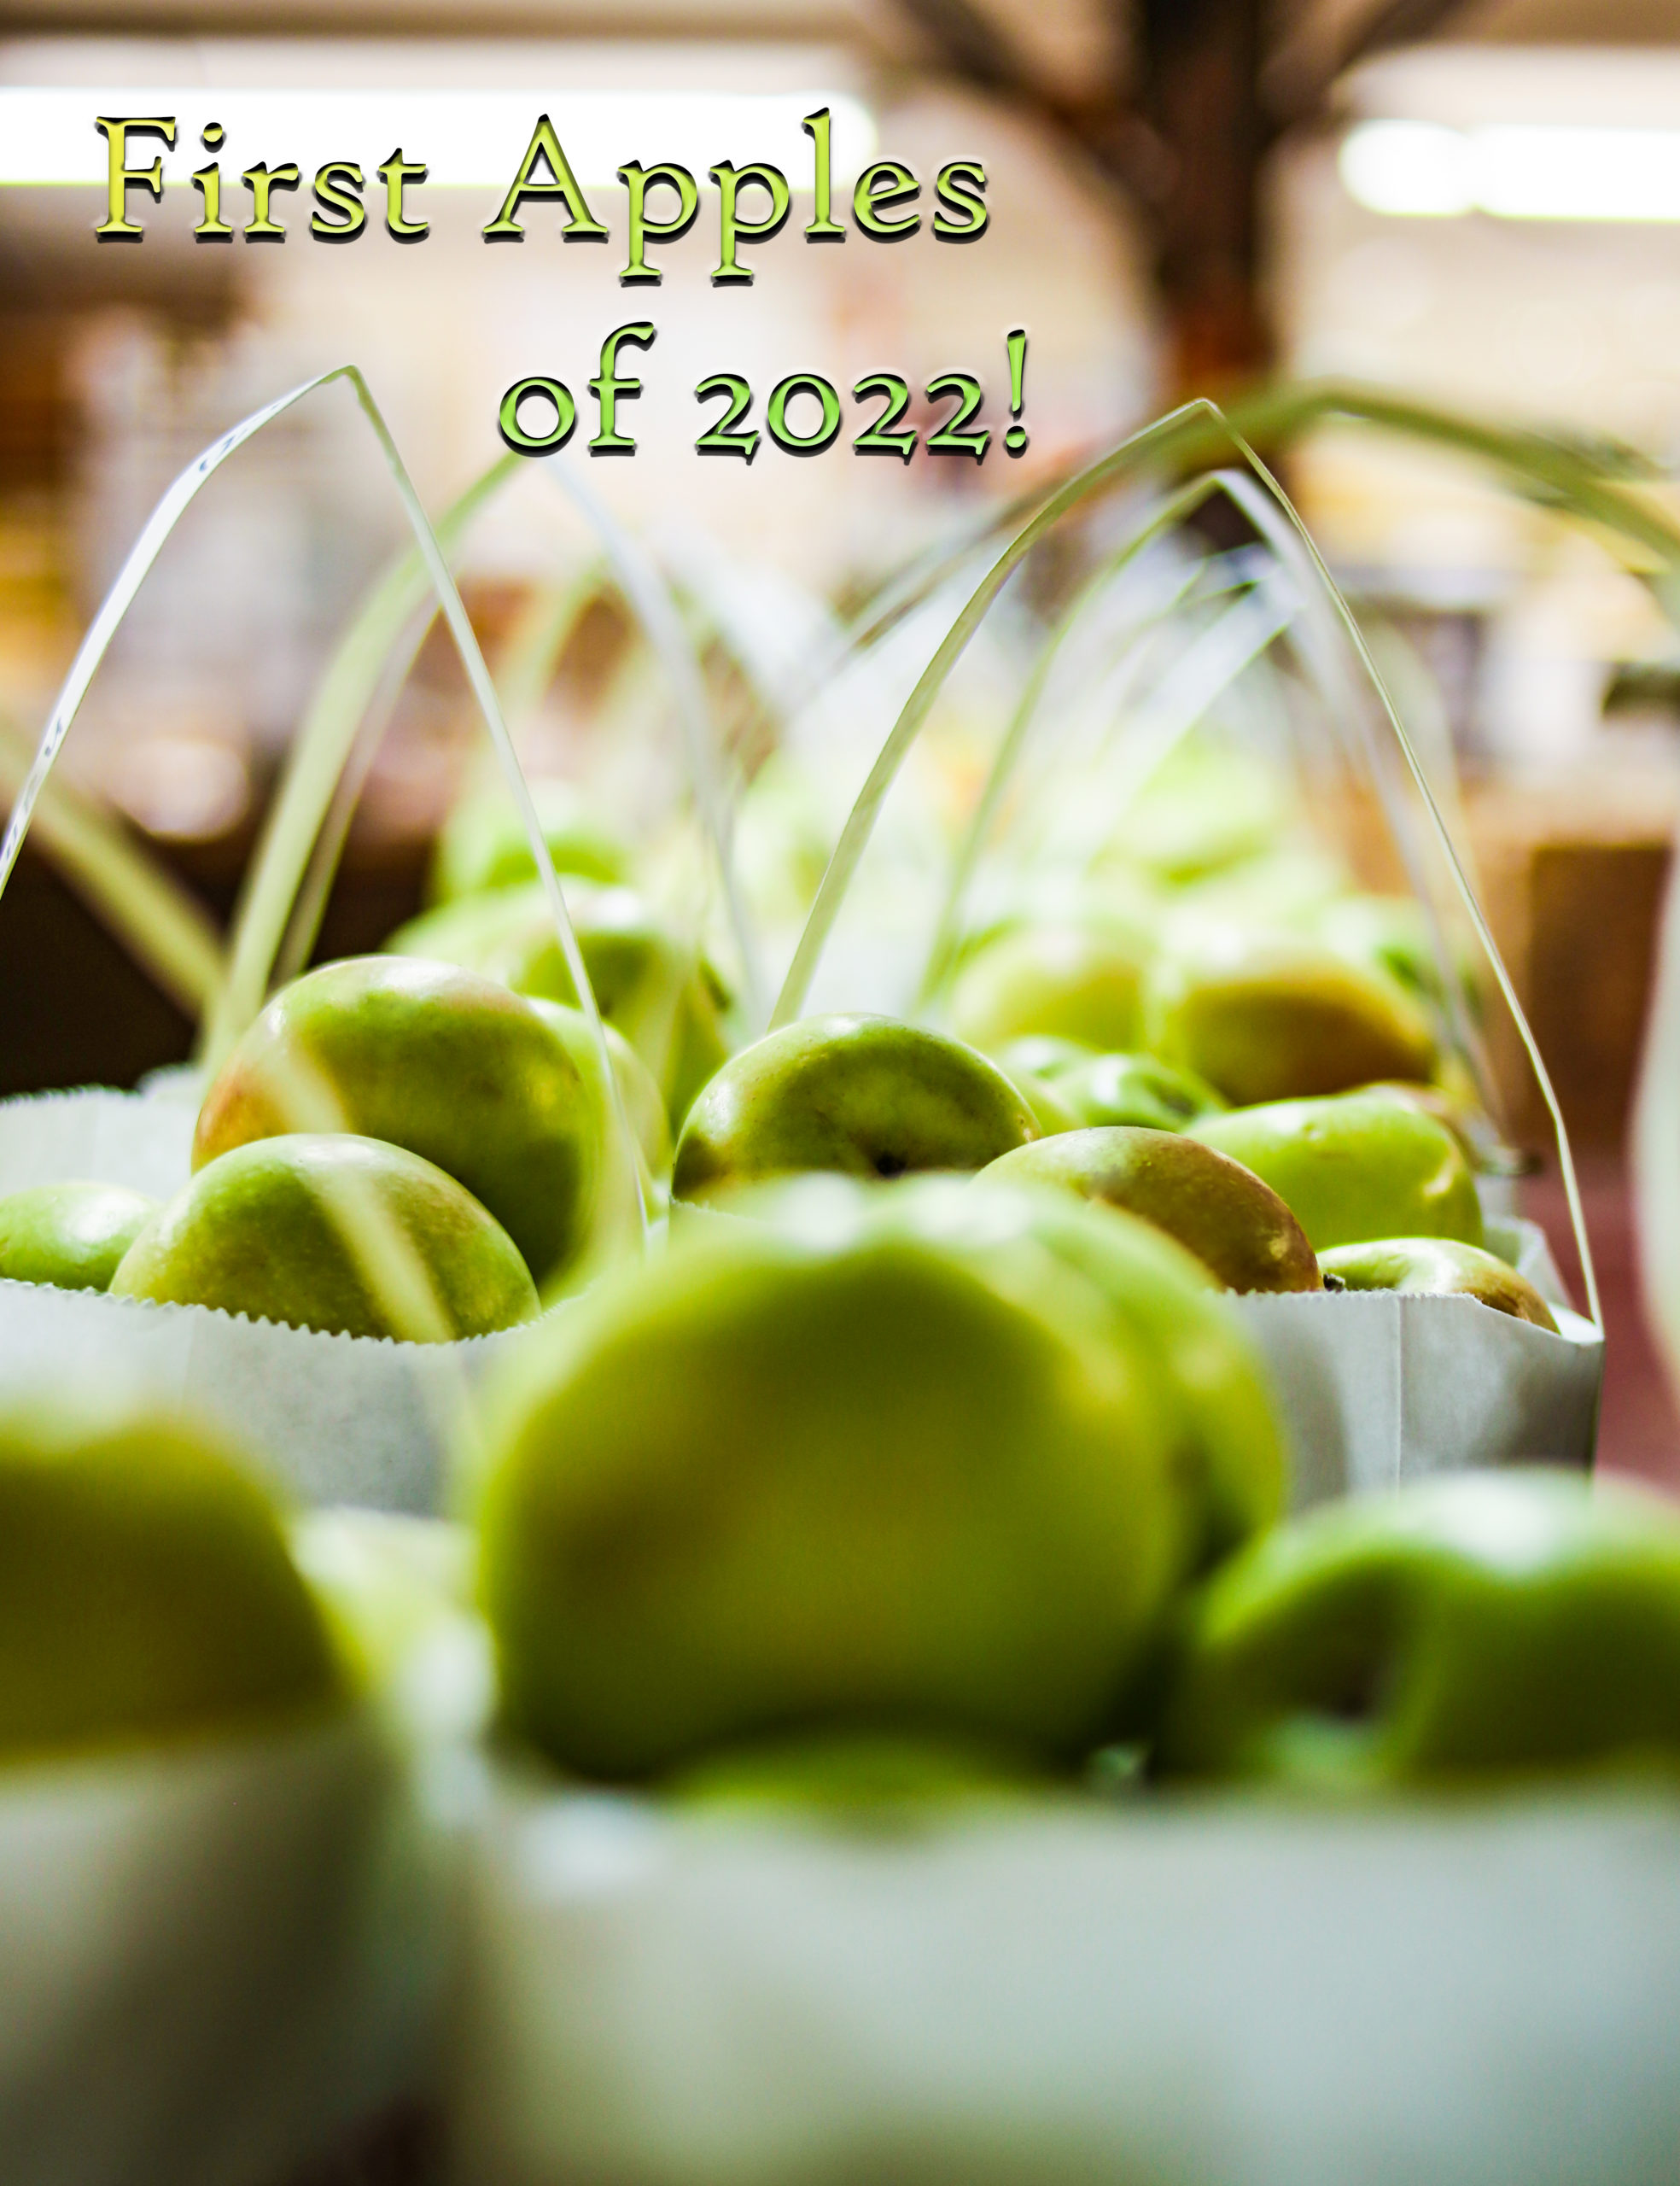 First Apples of 2022!